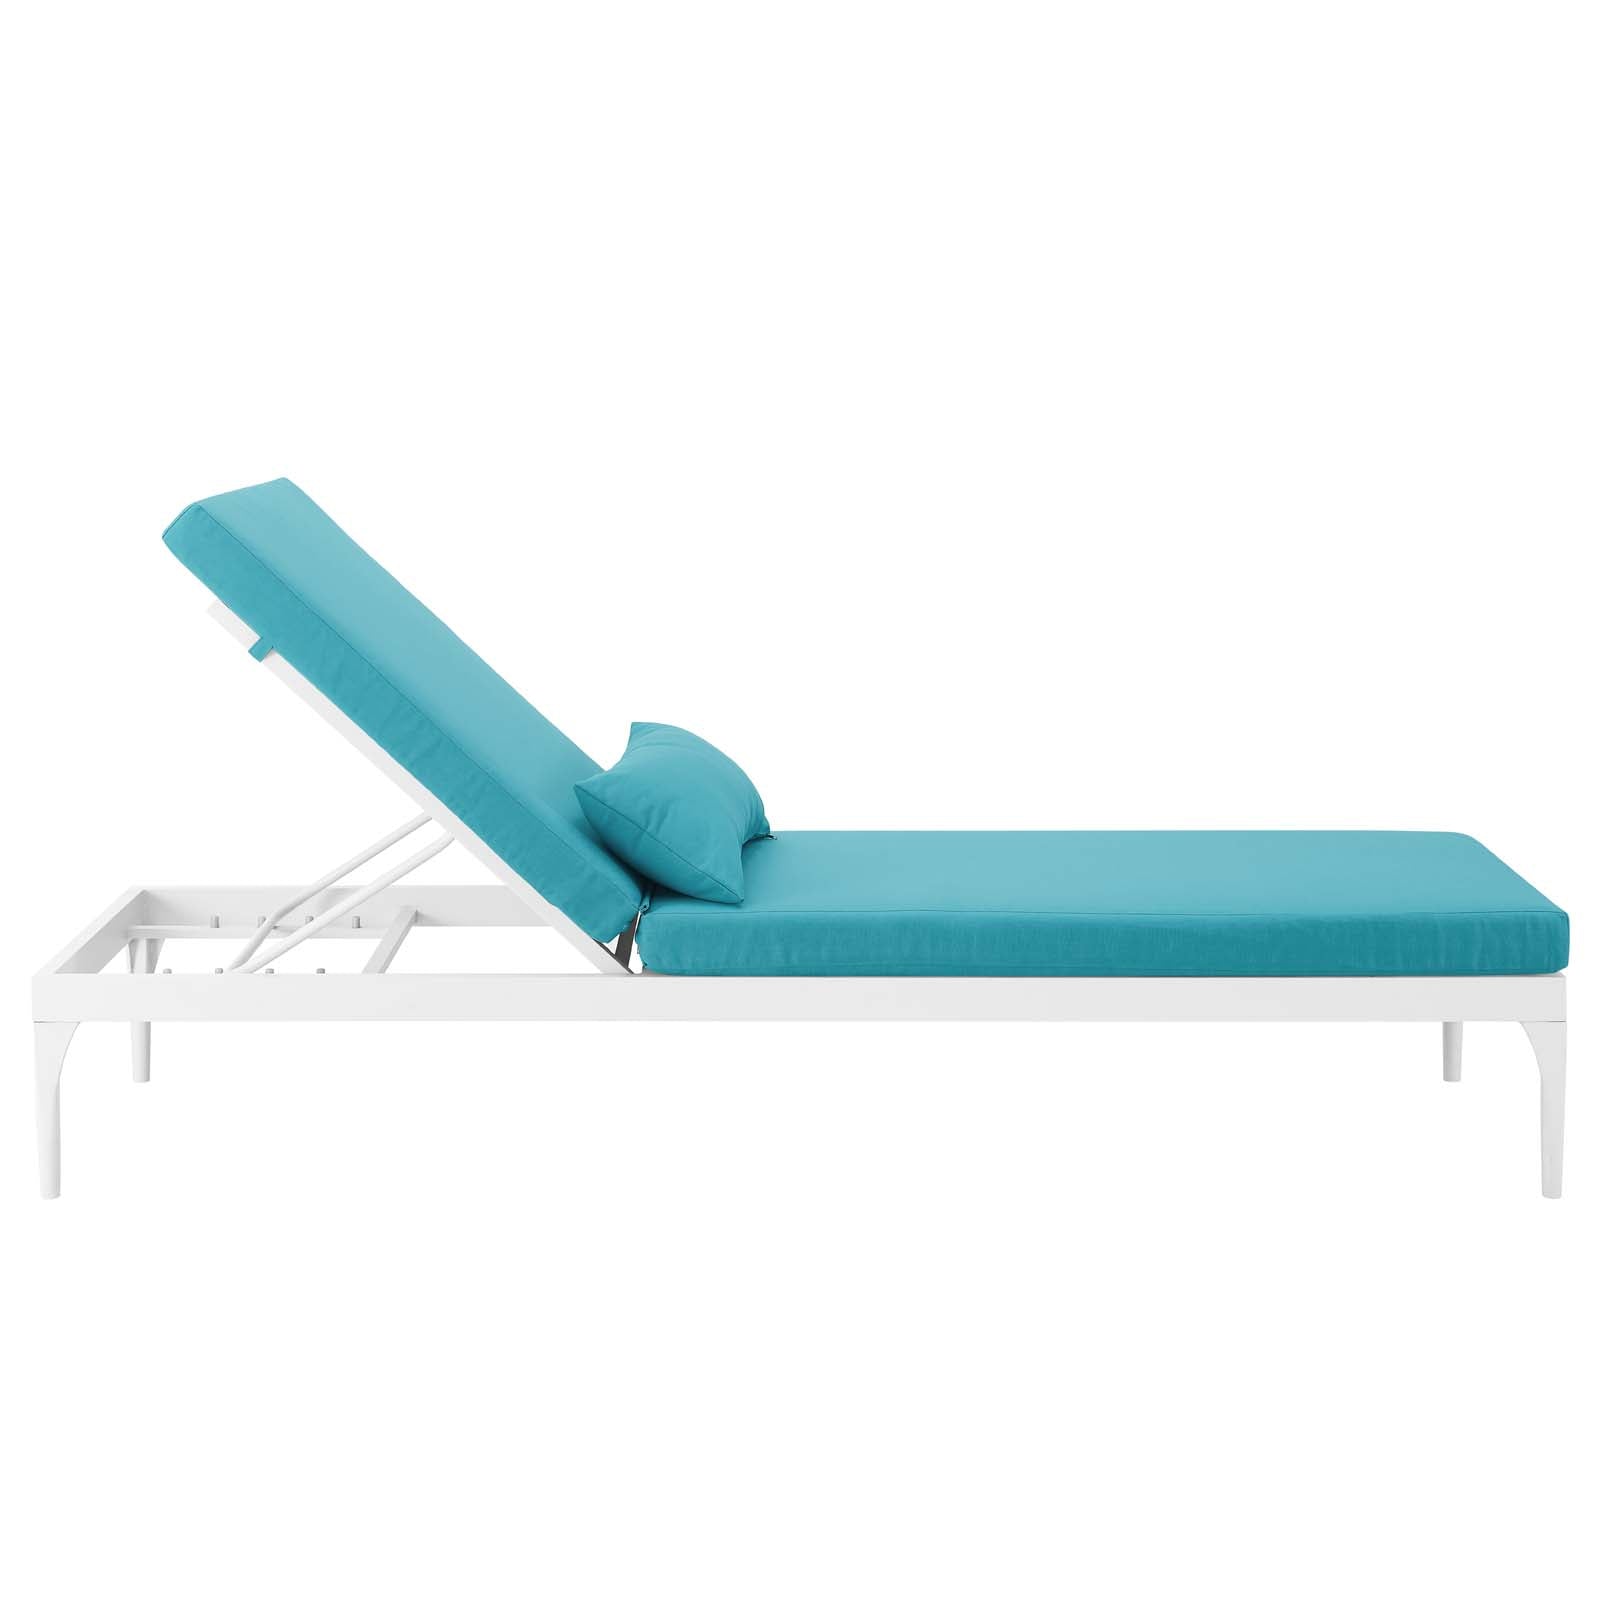 Modway Outdoor Loungers - Perspective Cushion Outdoor Patio Chaise Lounge Chair White Turquoise